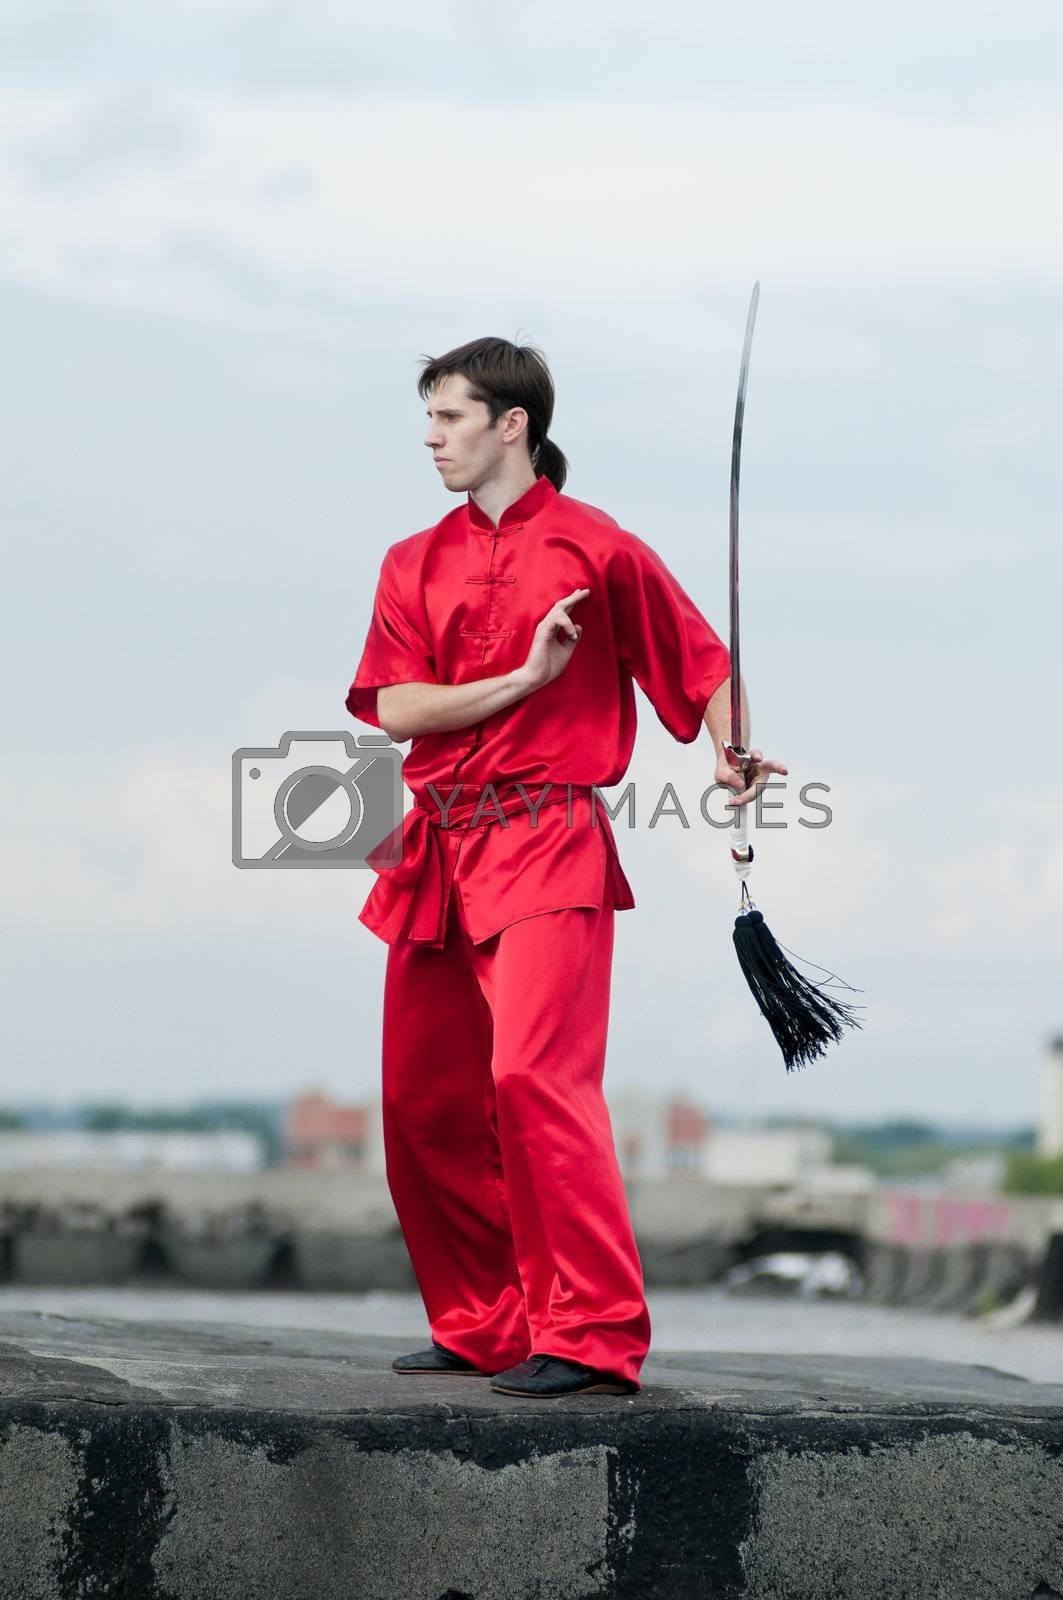 Royalty free image of Wushoo man in red practice martial art by markin